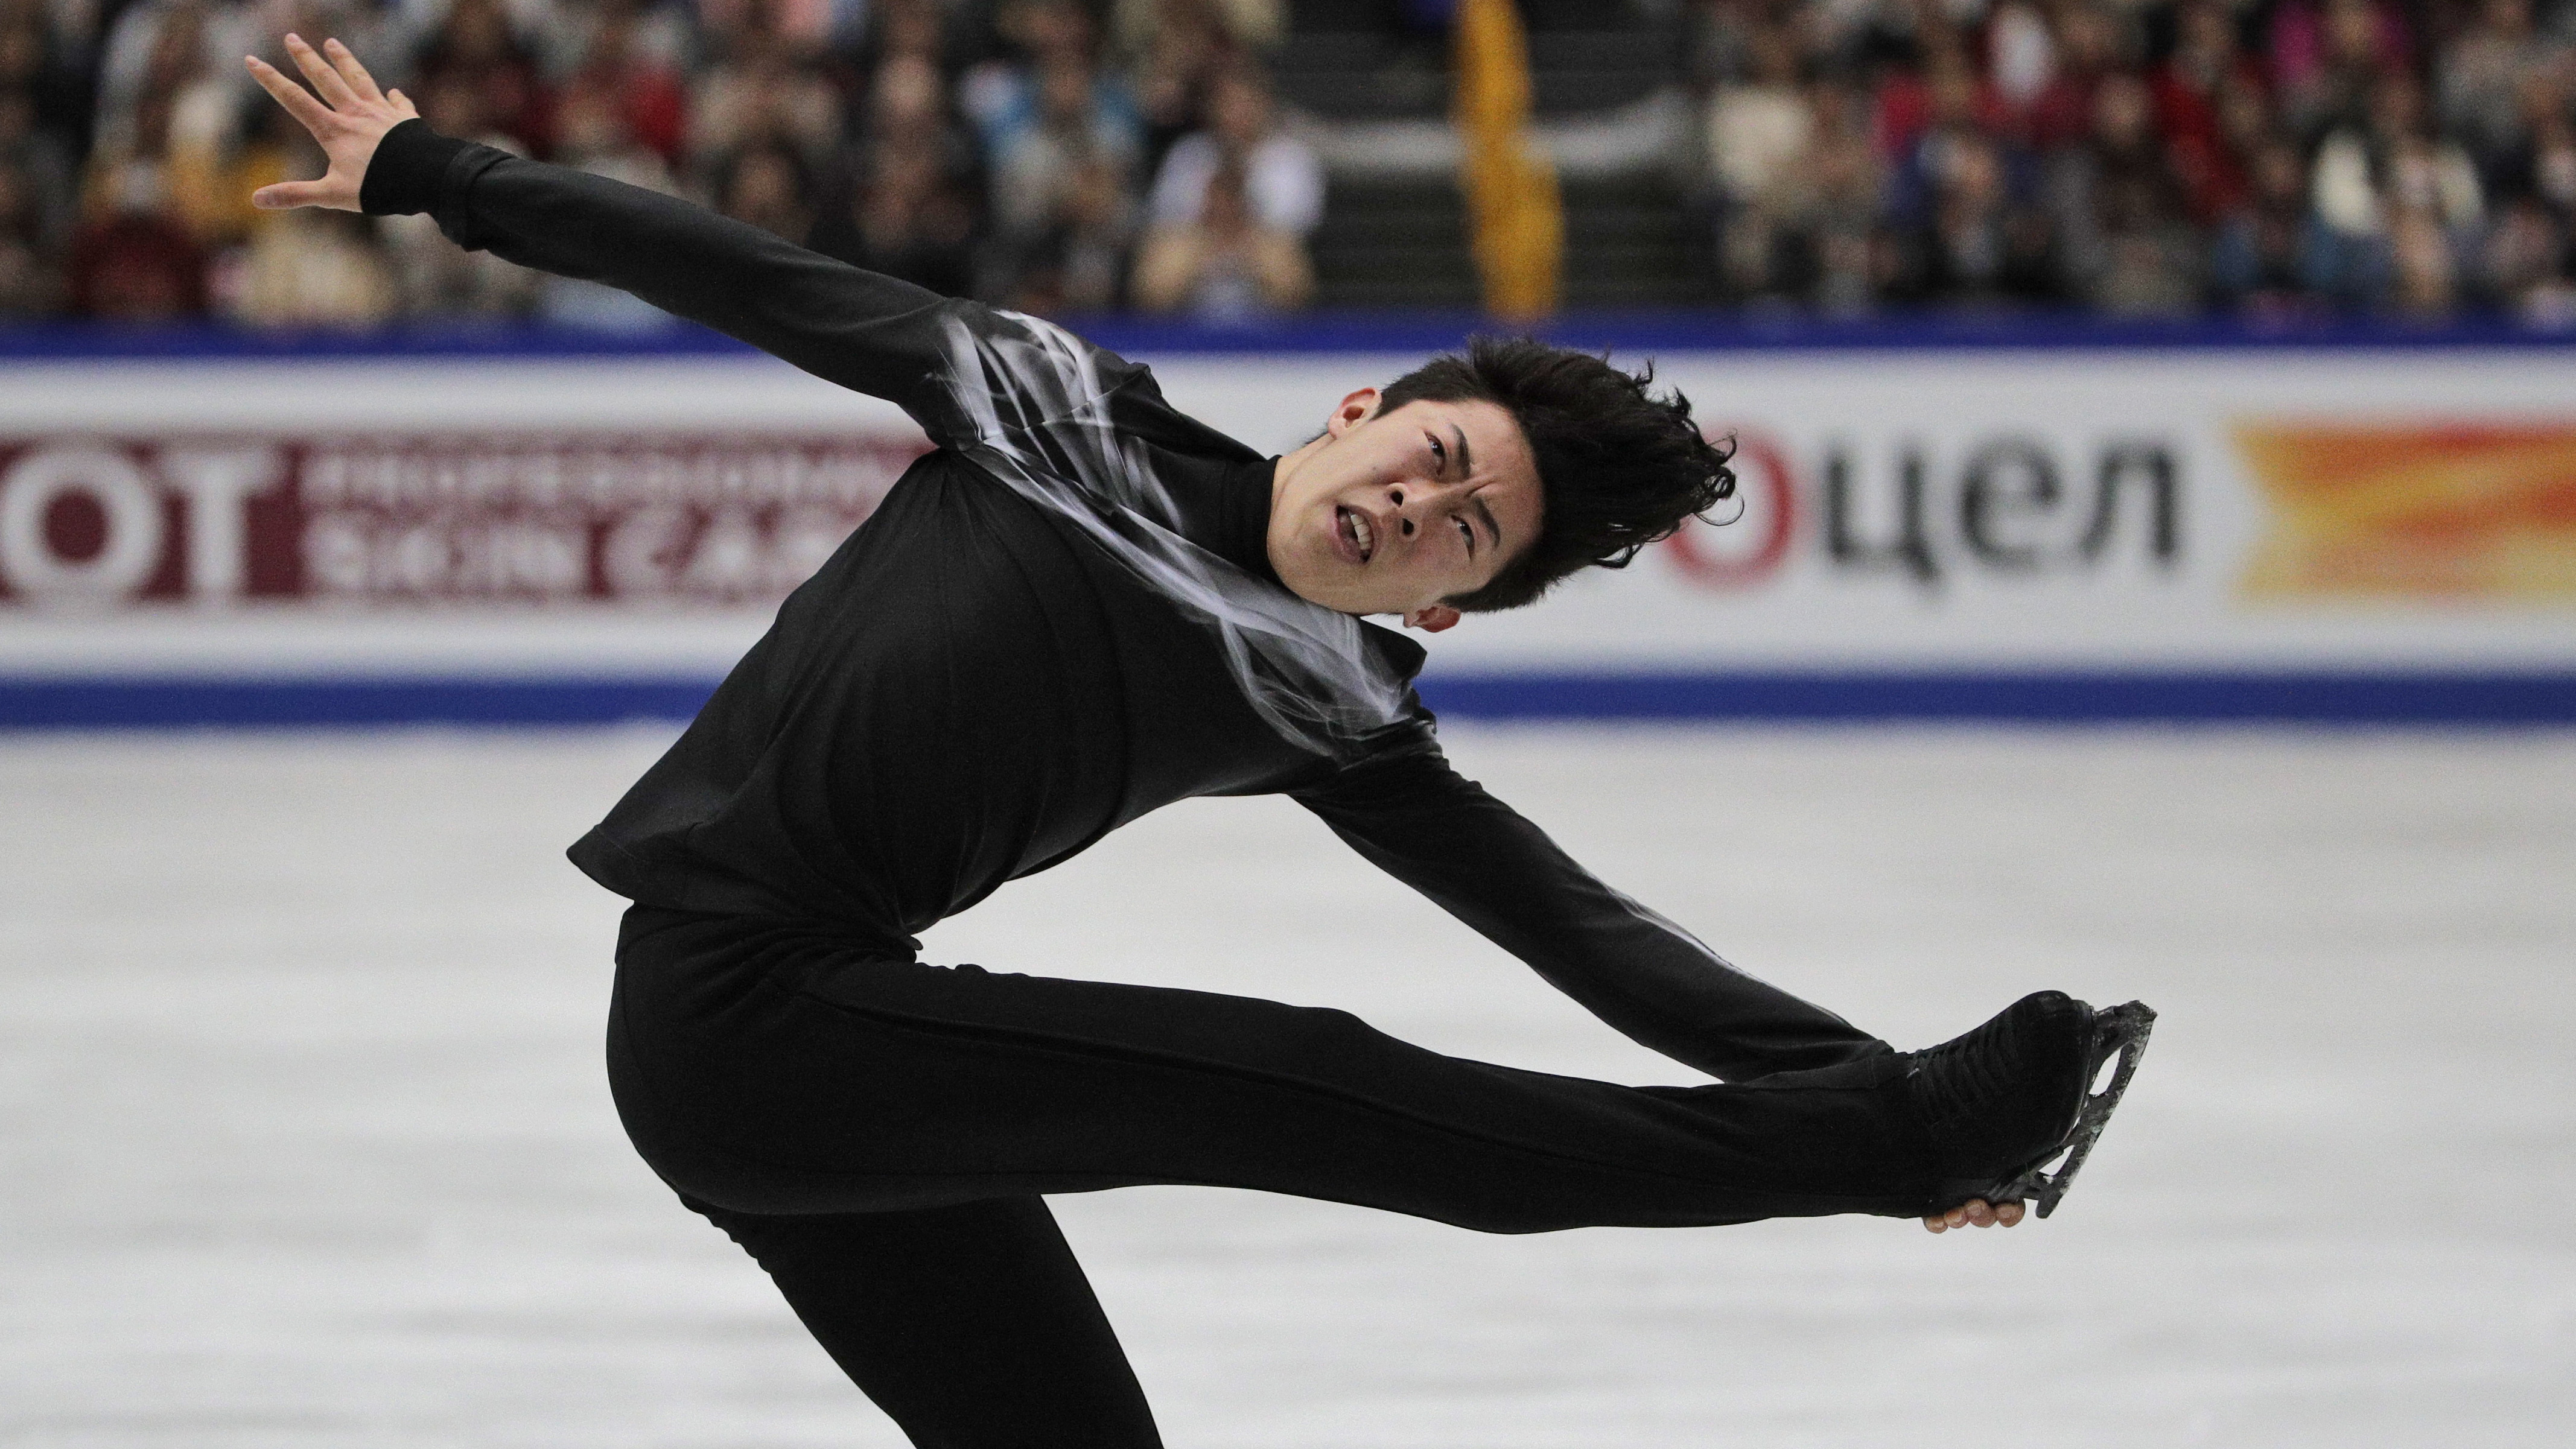 Nathan Chen produces spectacular free skate to win gold at 2019 World Figure Skating Championships wwltv